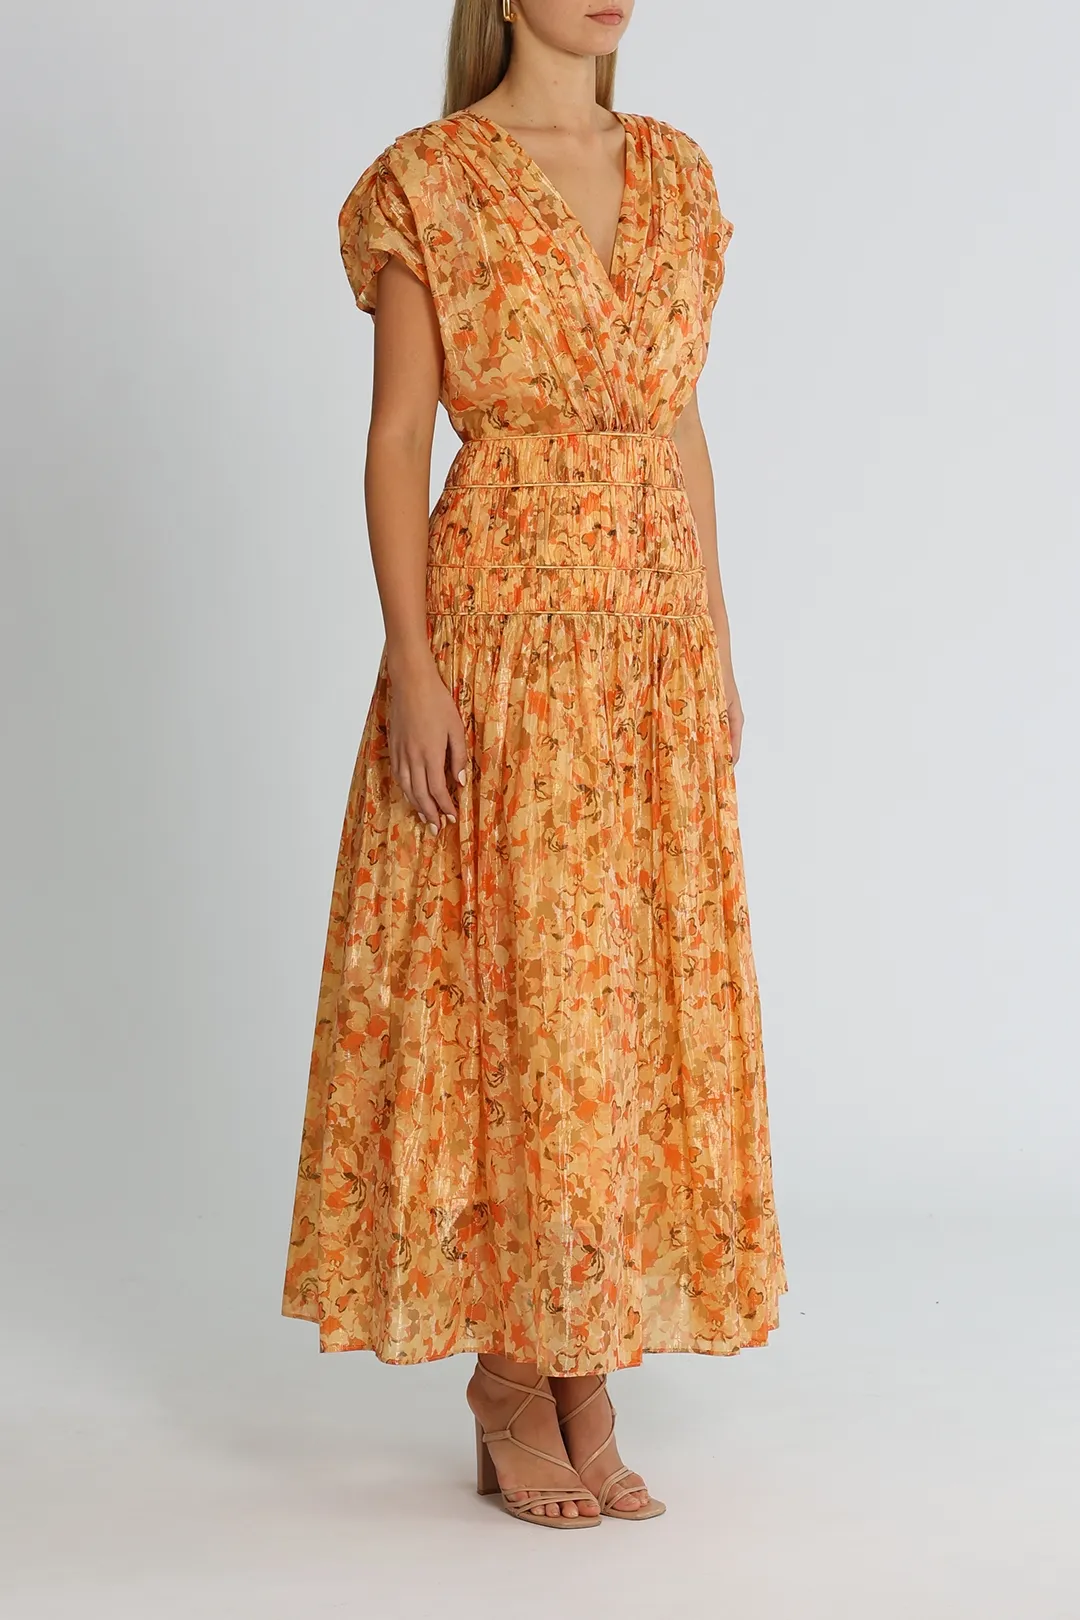 Acler Bicknell Dress in Peach Parfait for rent.